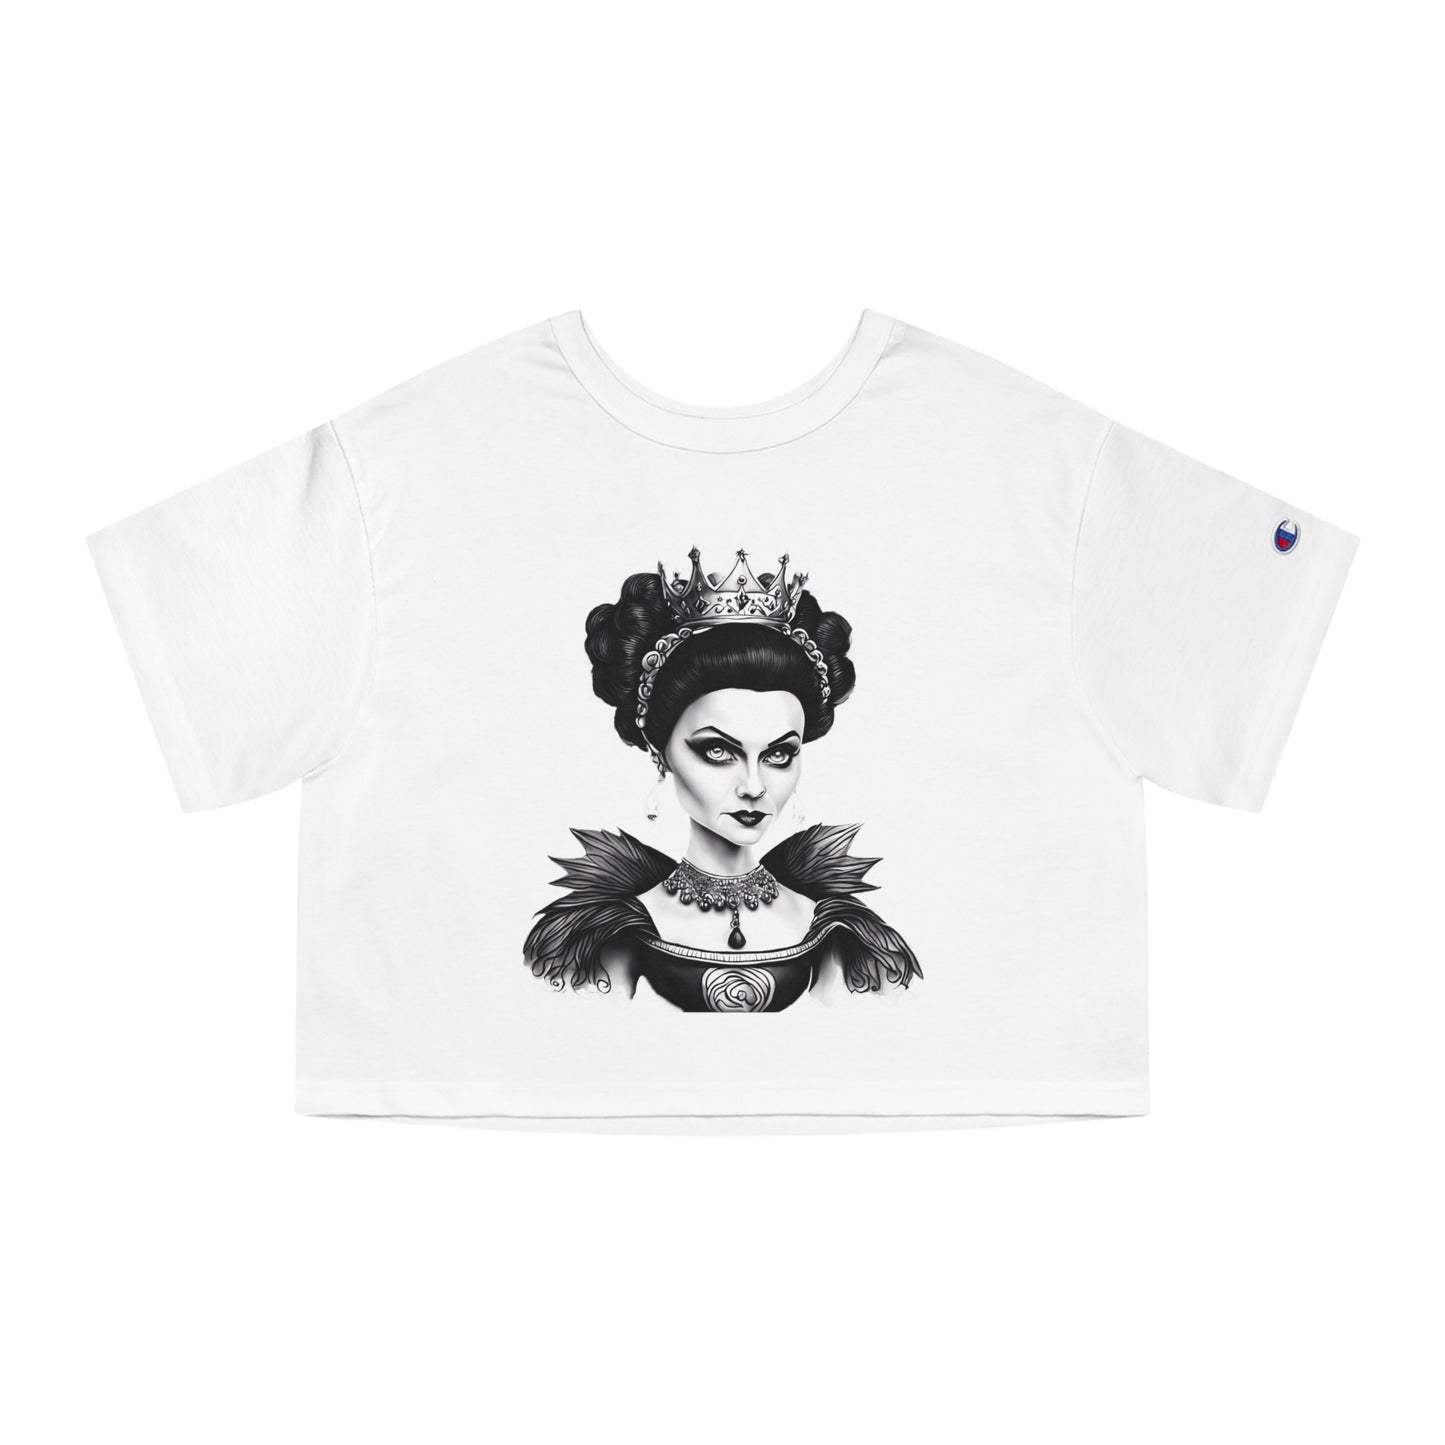 Stamina for Men Women's Queen of Spades Swingers Cropped white T-Shirt showing front view